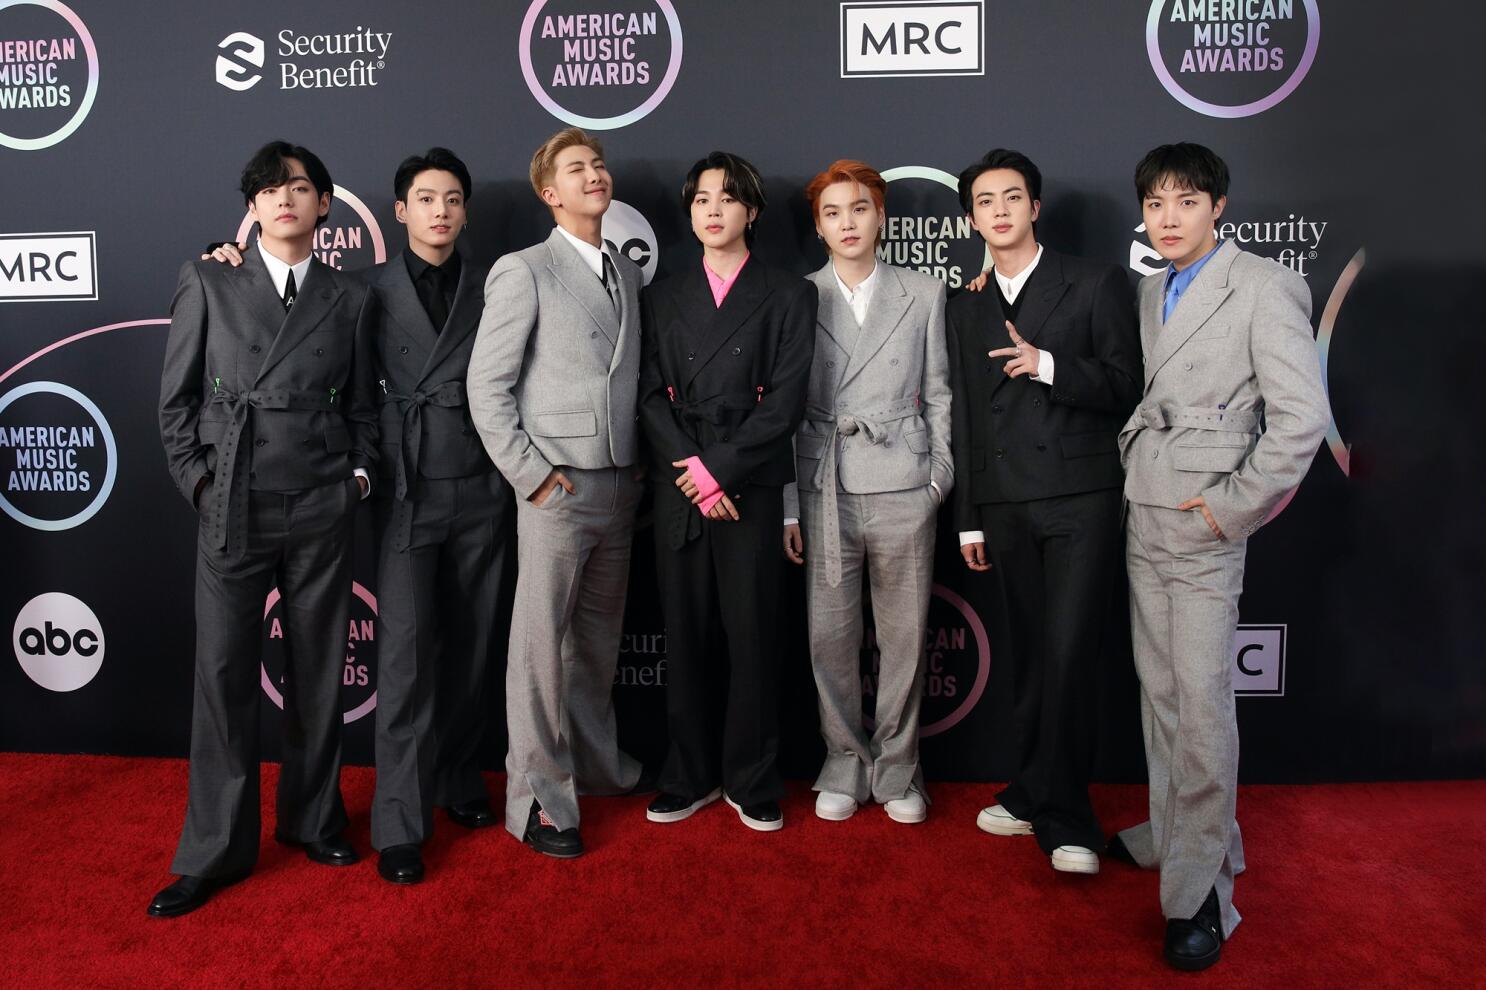 AMAs 2021: How BTS made history with its big wins - Los Angeles Times